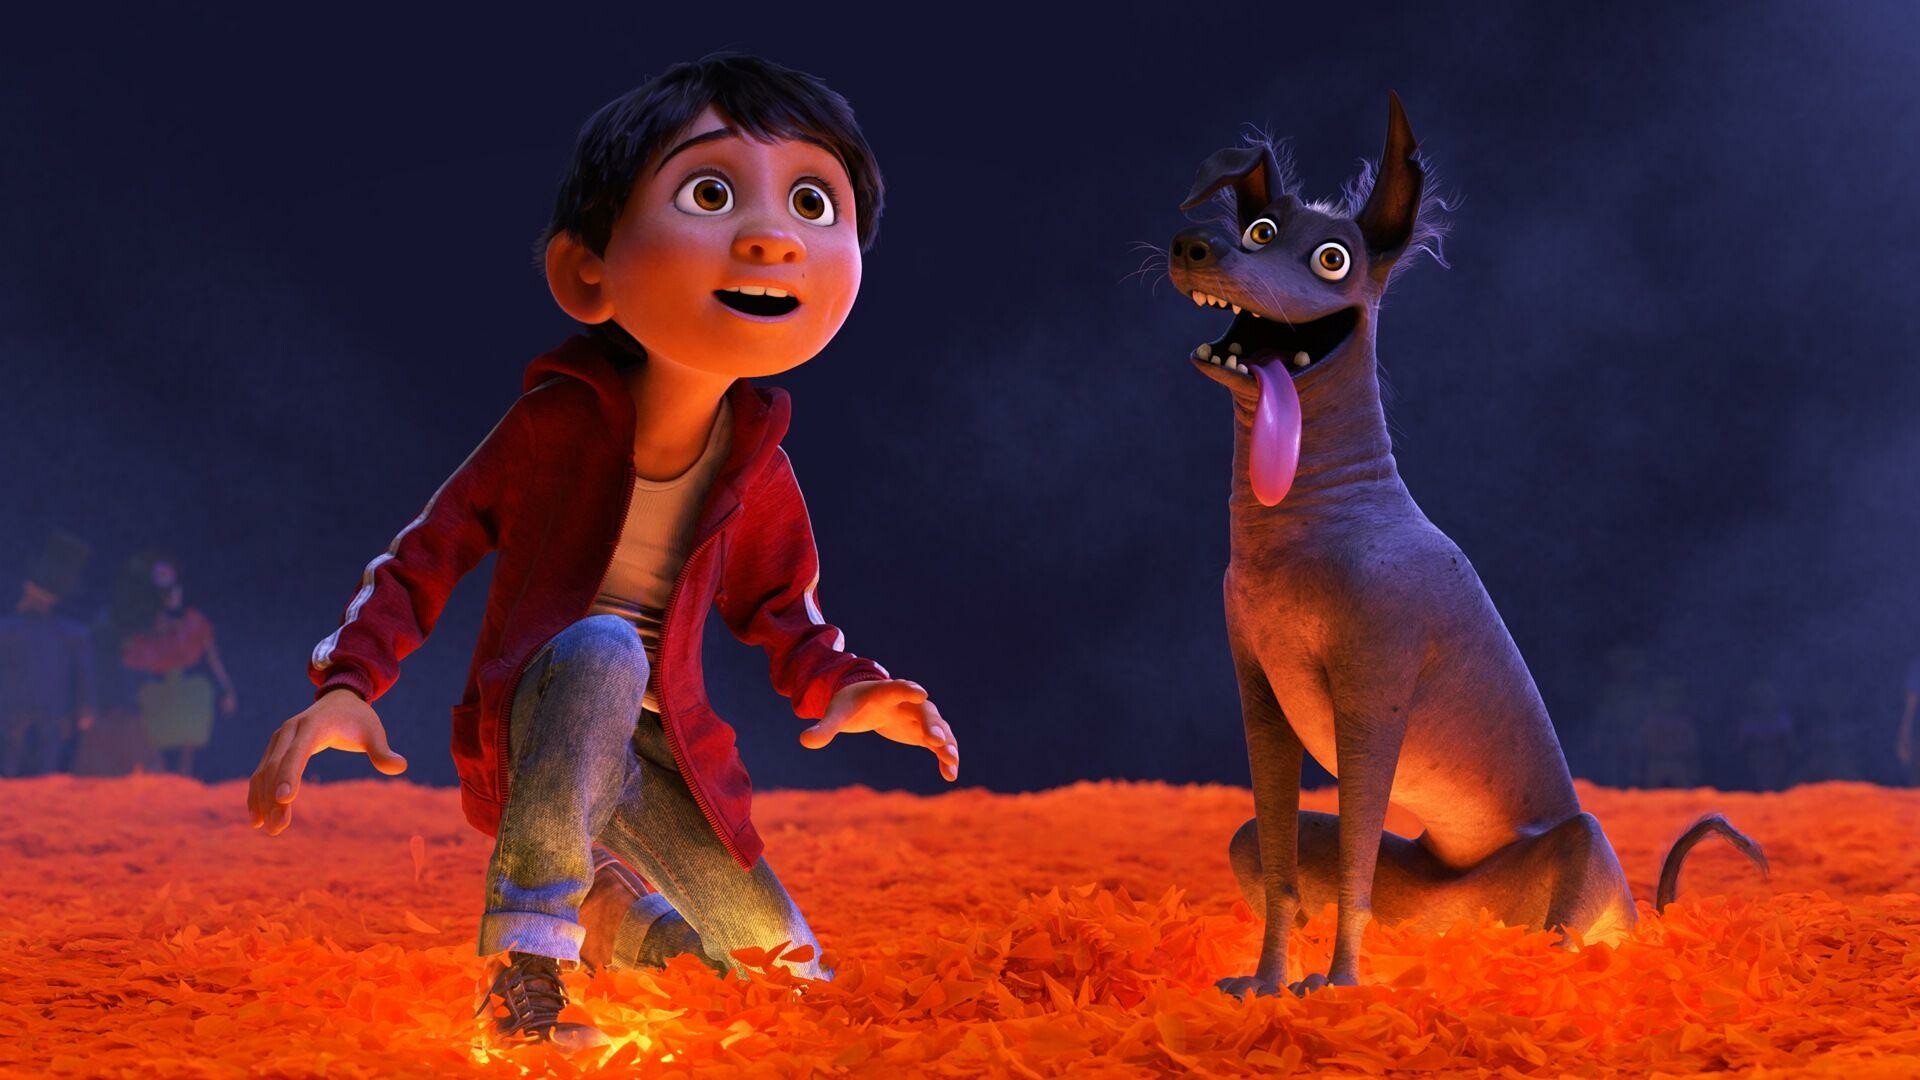 Coco (Cartoon): An amazing film about a boy called Miguel, Disney. 1920x1080 Full HD Background.